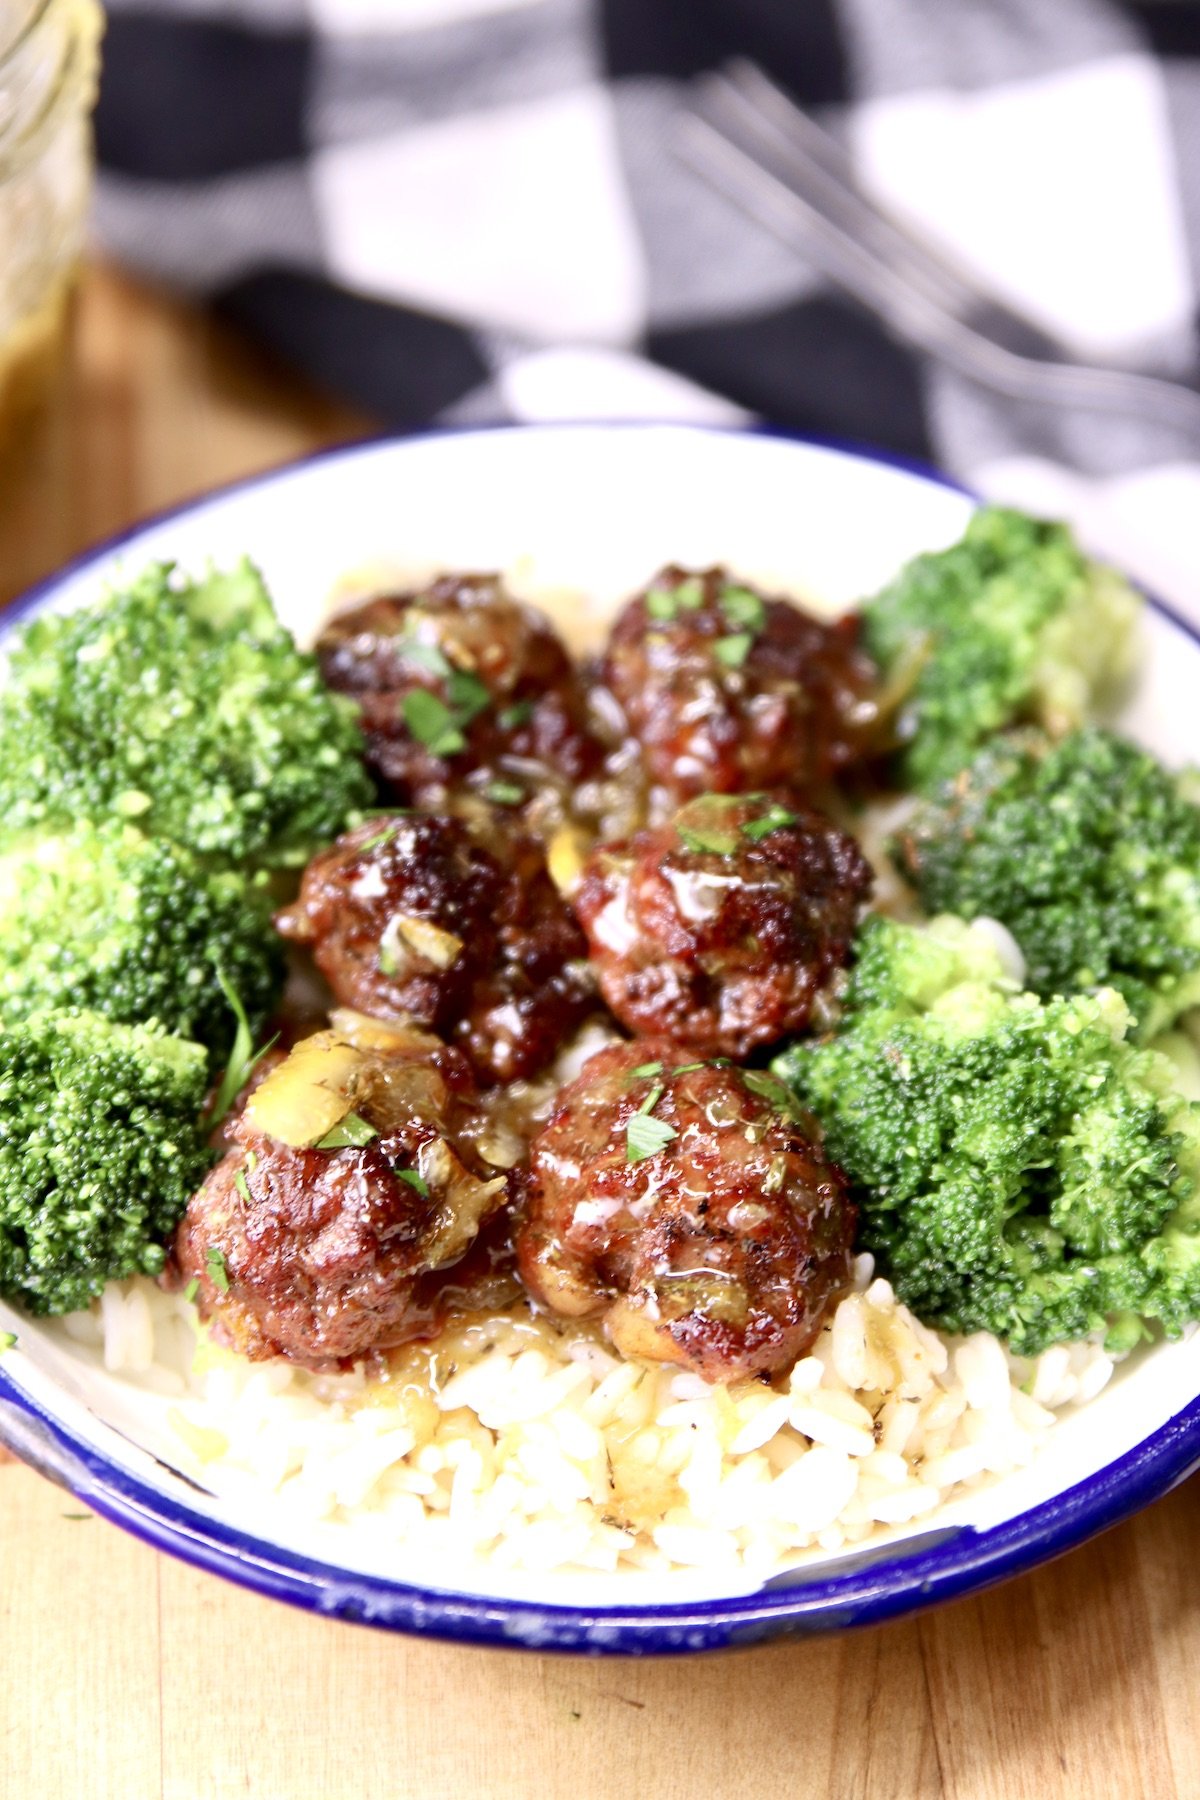 meatballs with orange sauce and broccoli served over rice